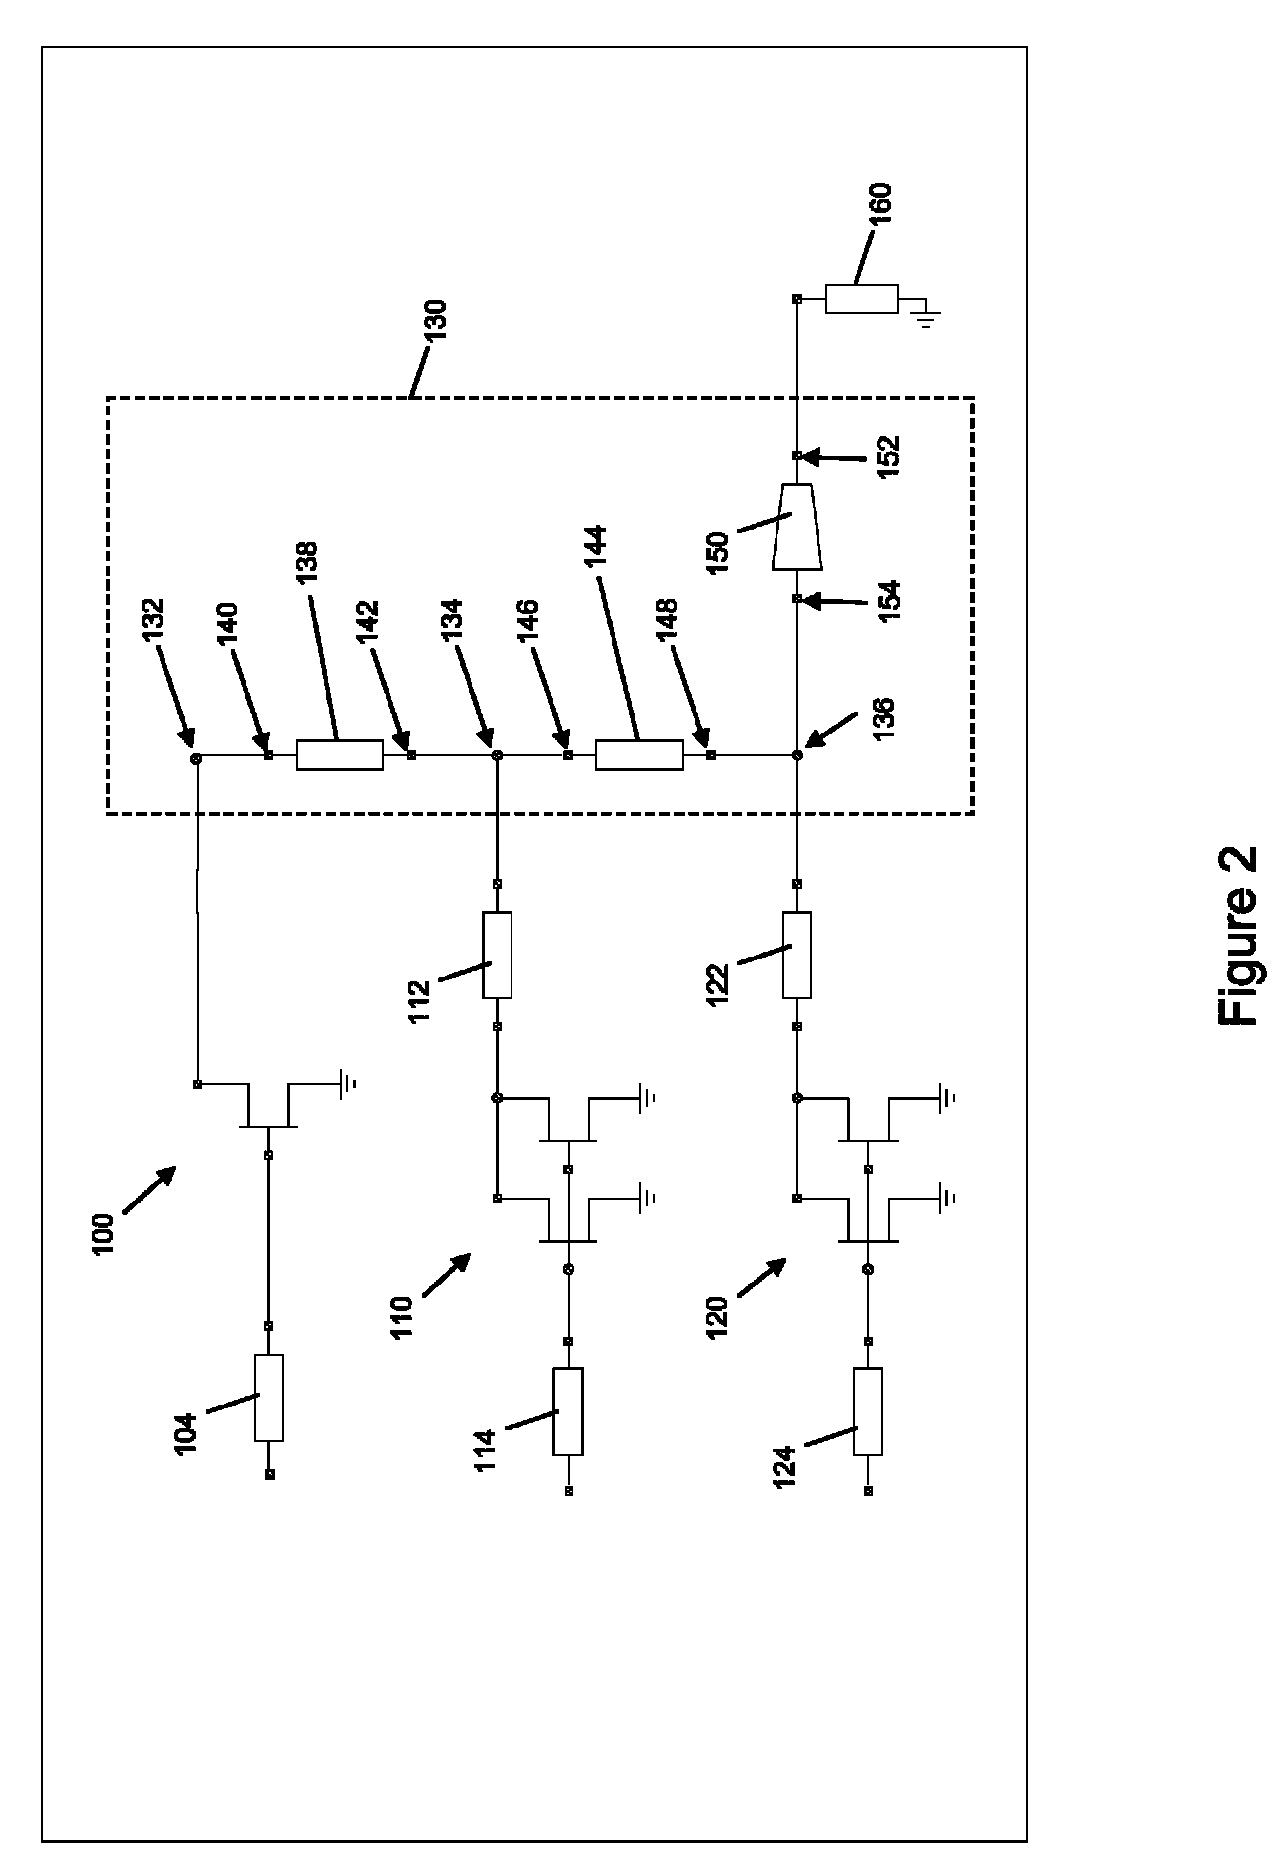 Wideband Doherty amplifier circuit with impedance combiner